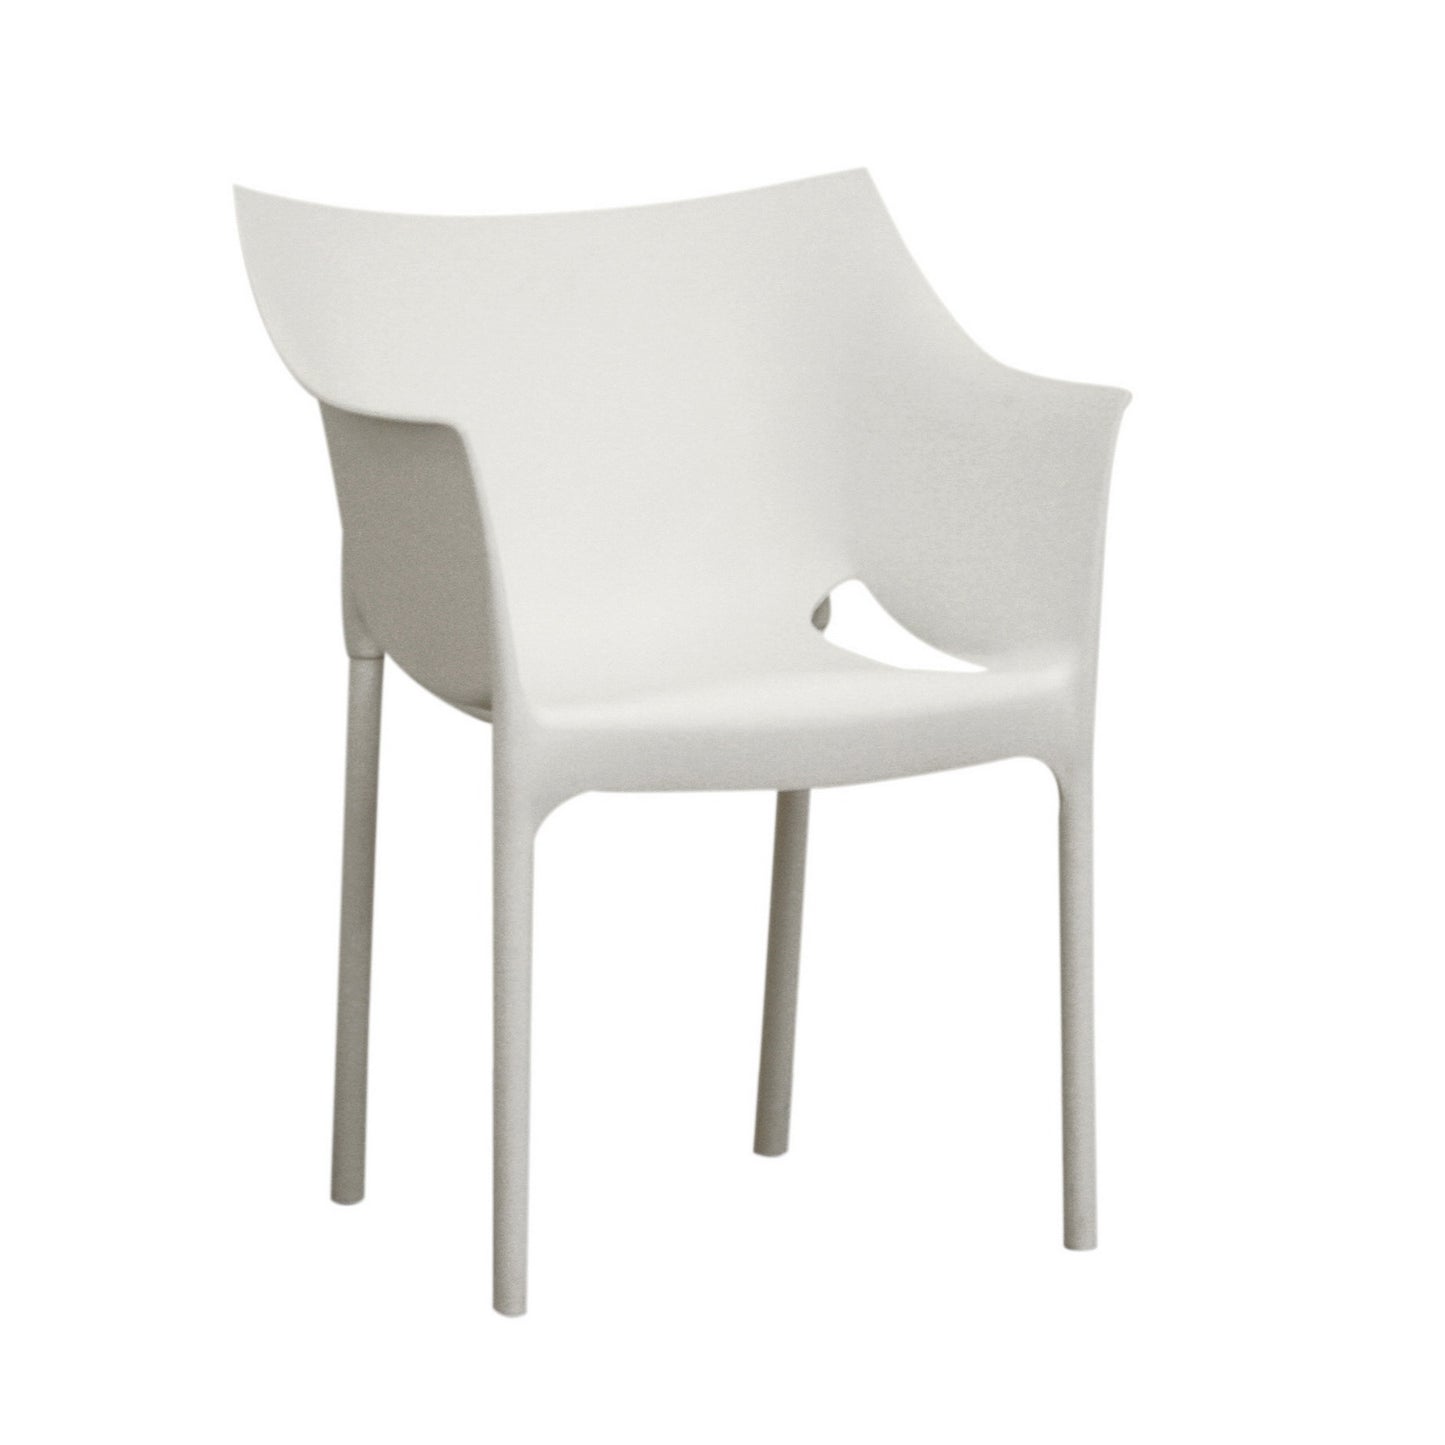 Modern 4 Dining Chairs in White Molded Plastic bxi3025-15